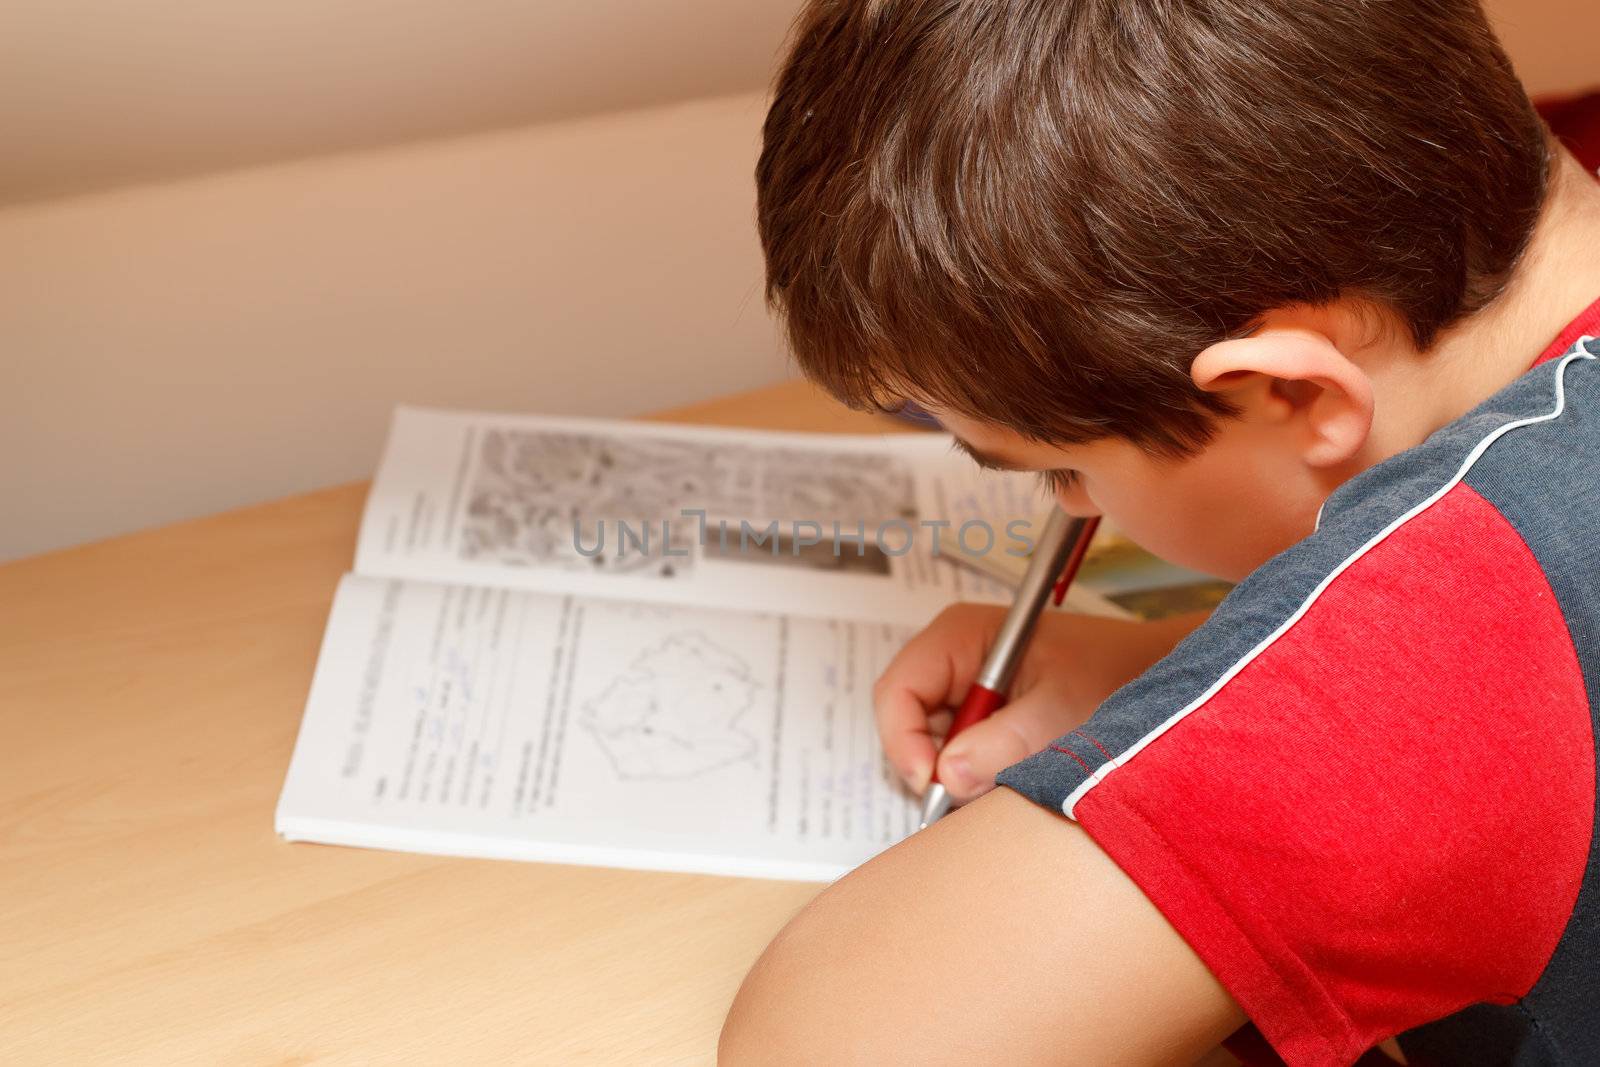 boy doing homework, writing text from workbook by artush